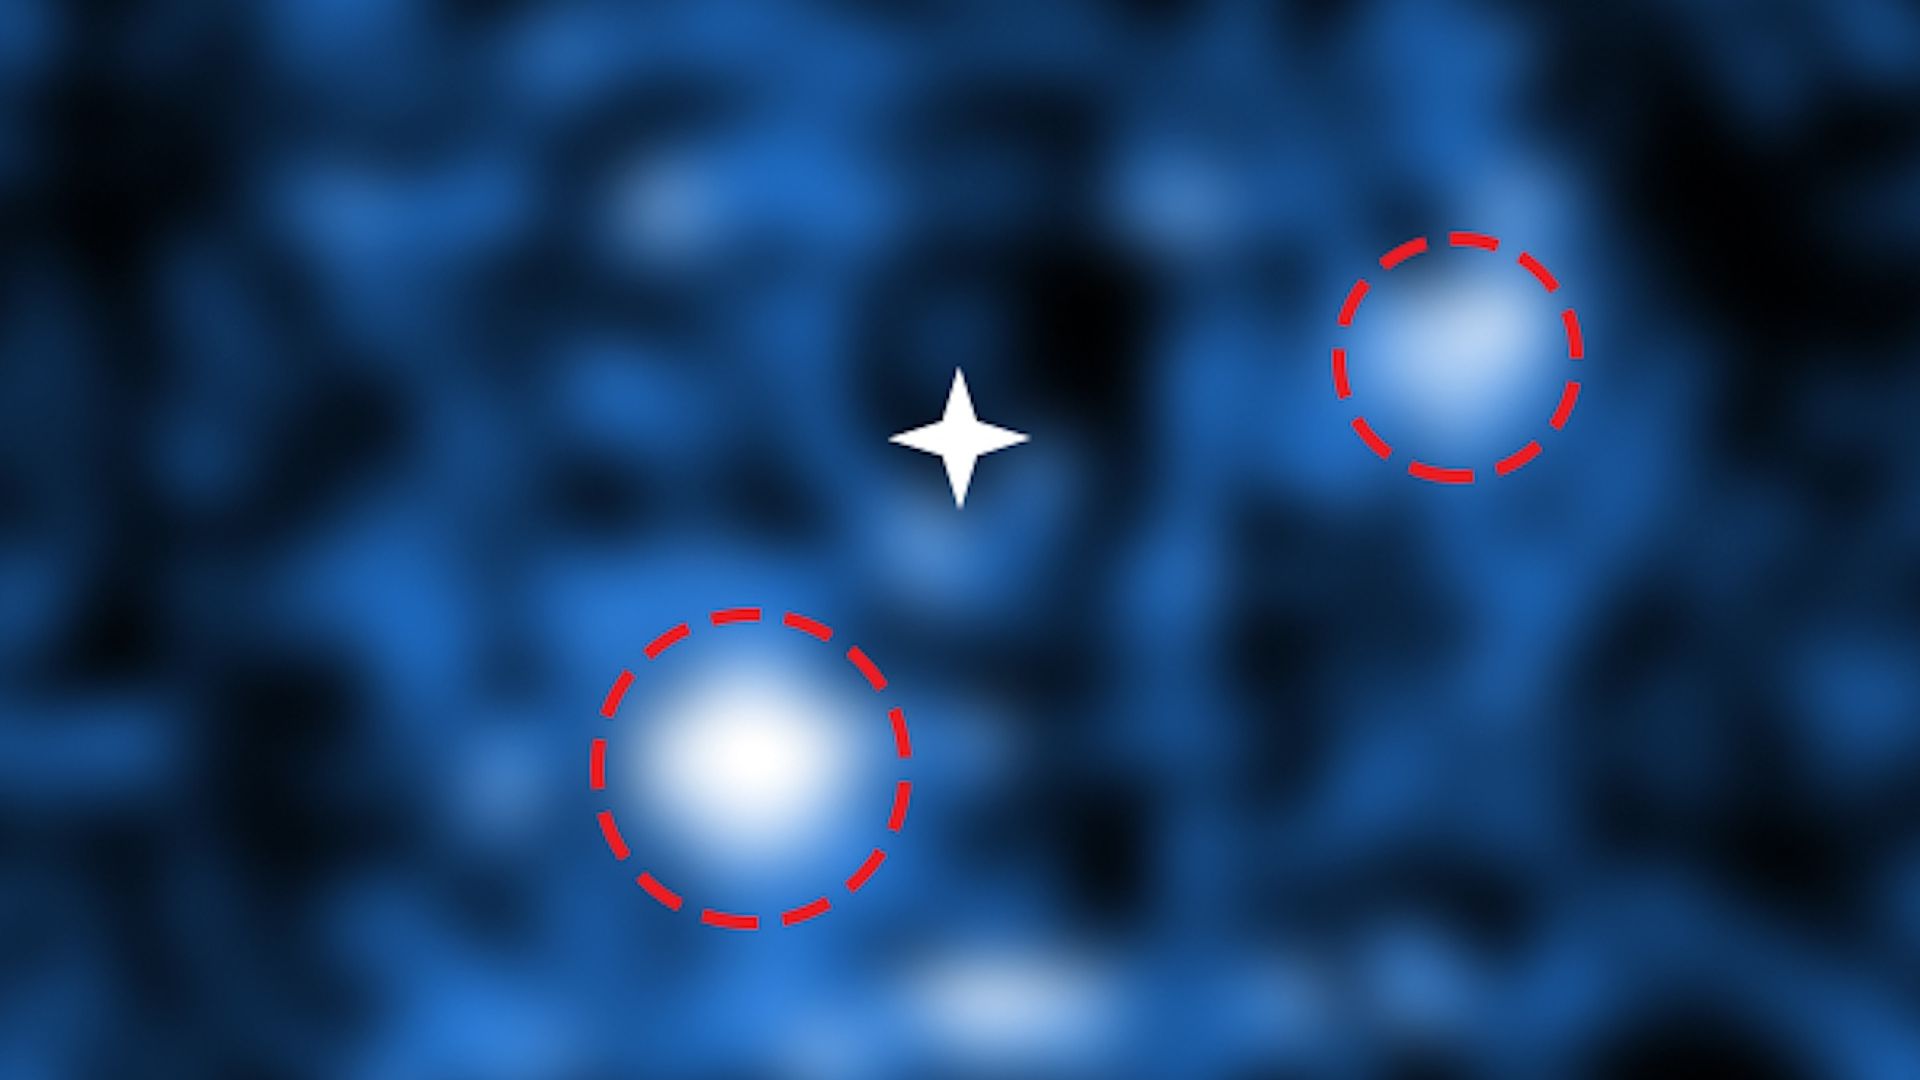 Two planets seen orbiting a star light-years from Earth.